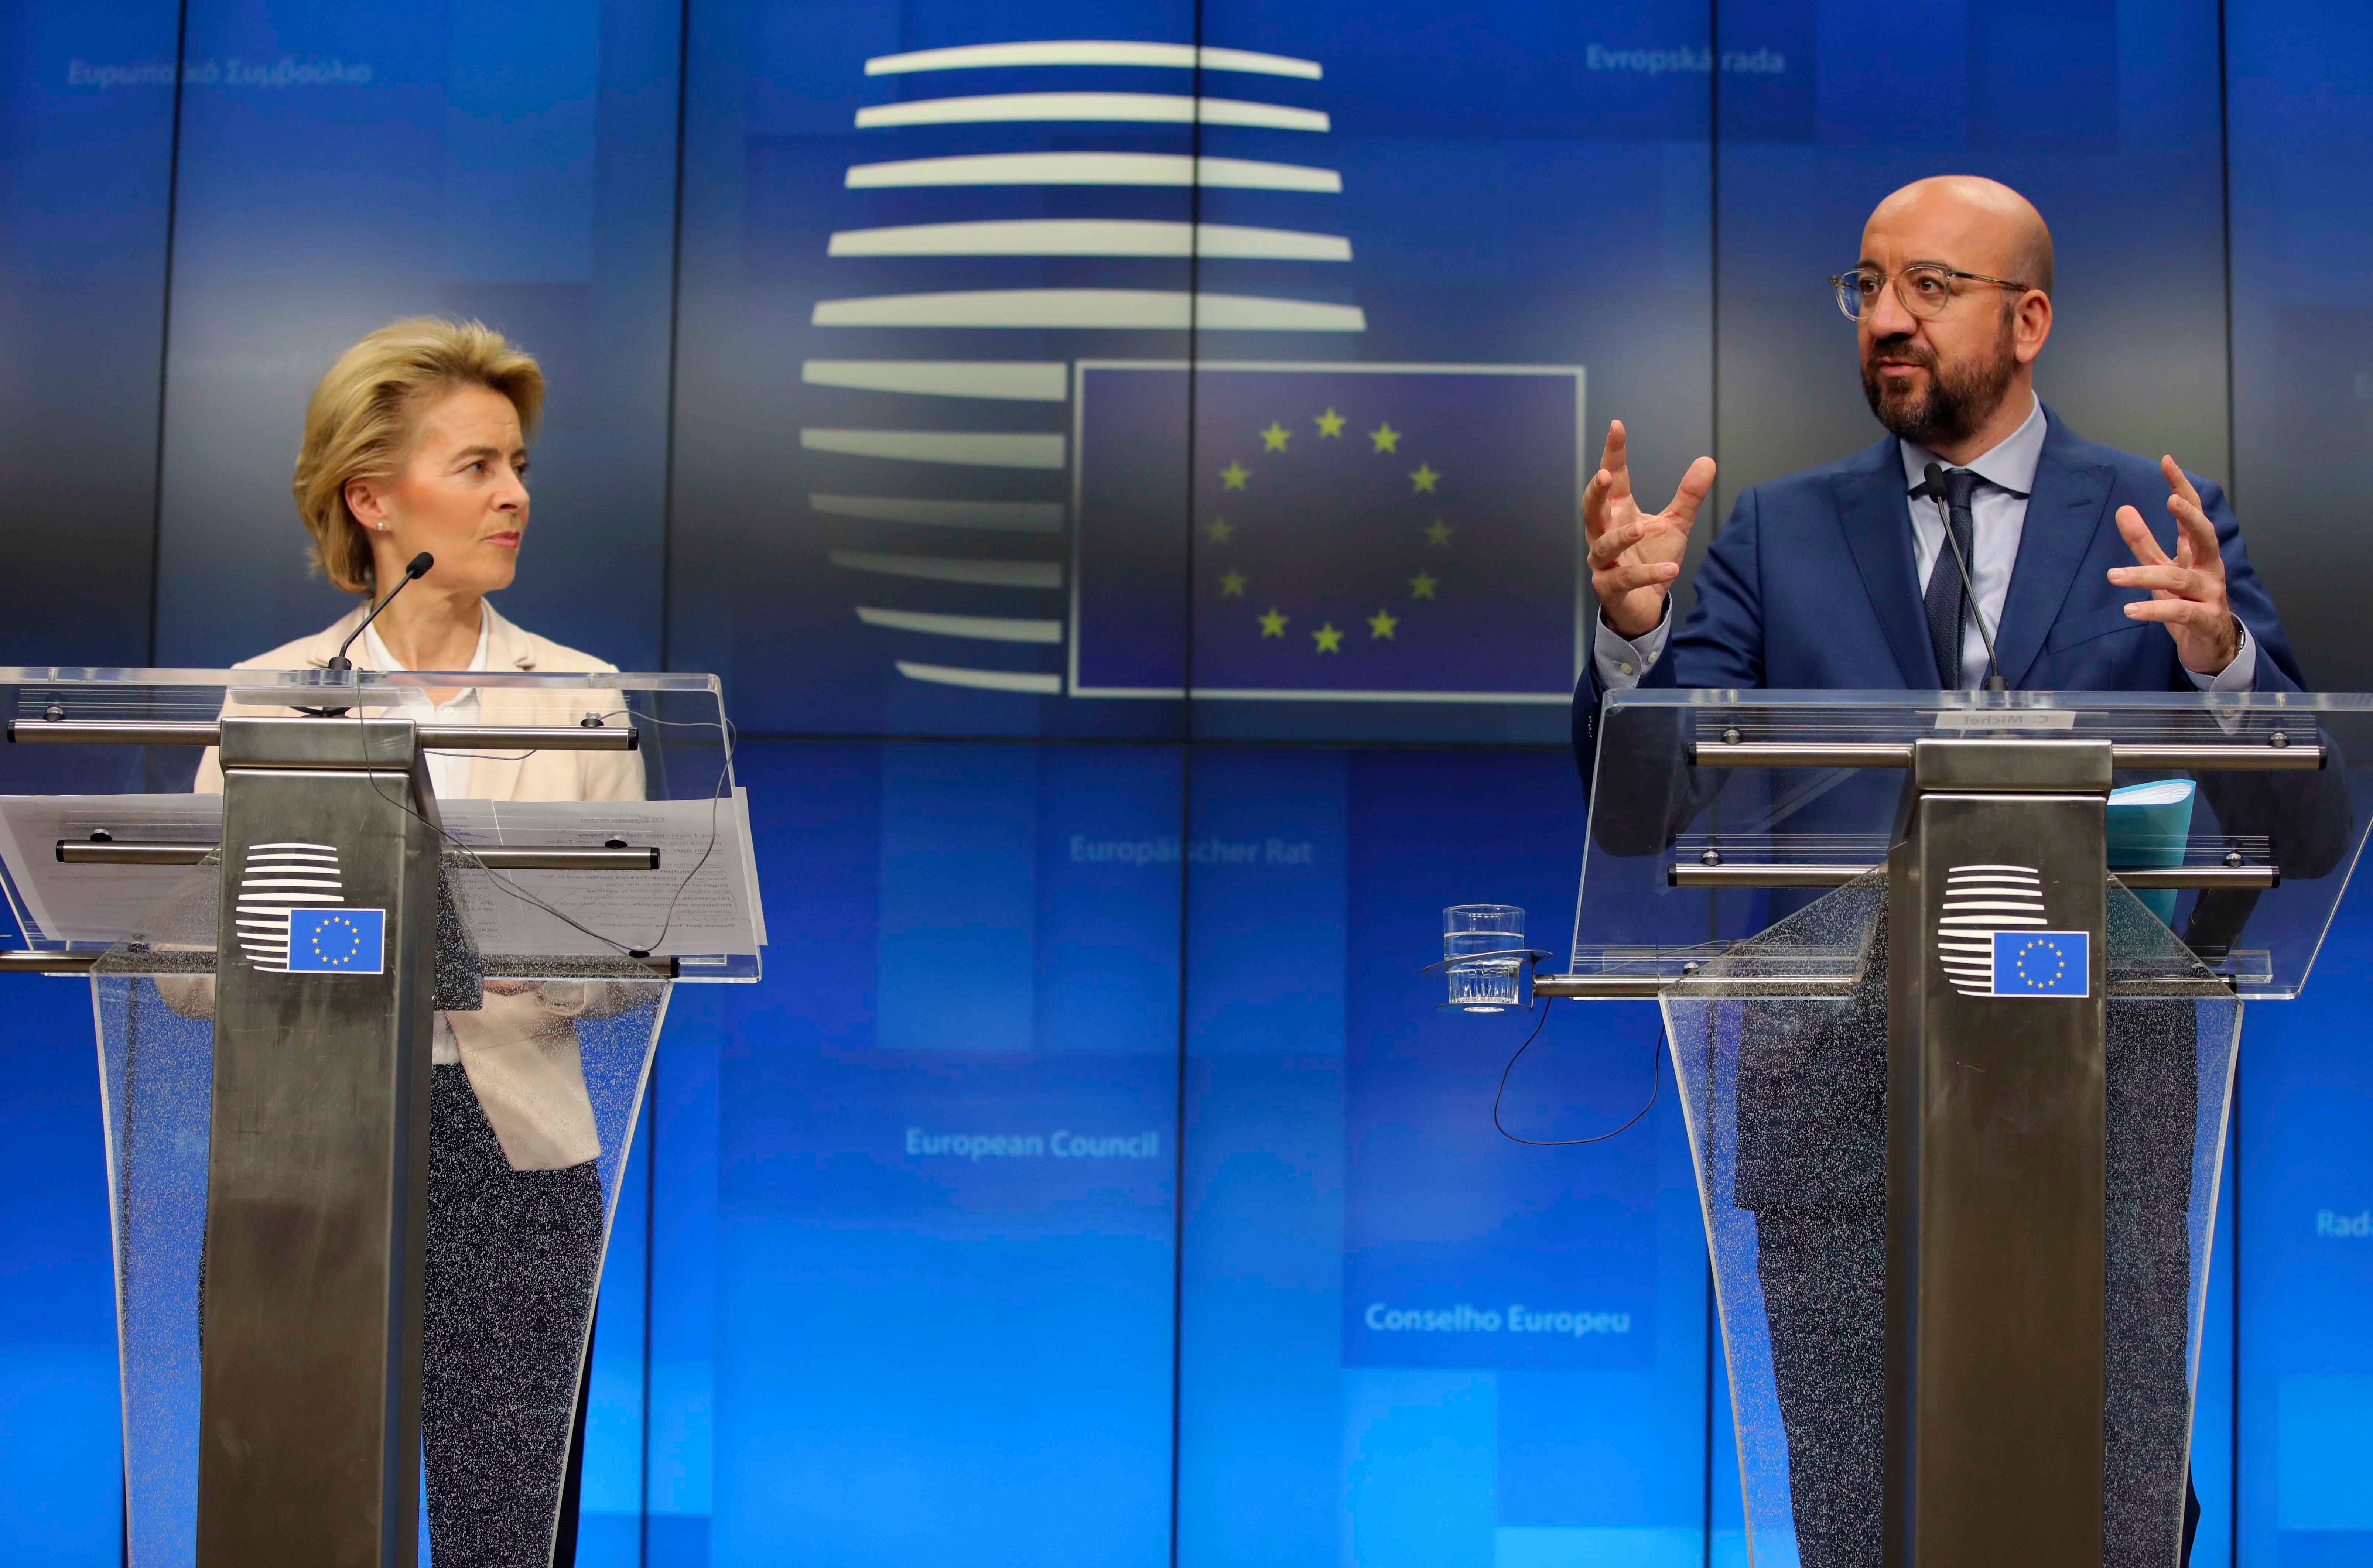 European Commission President Ursula von der Leyen and European Council President Charles Michel participate in a media conference after a meeting with Turkish President Recep Tayyip Erdogan at the European Council building in Brussels, March 9, 2020.  